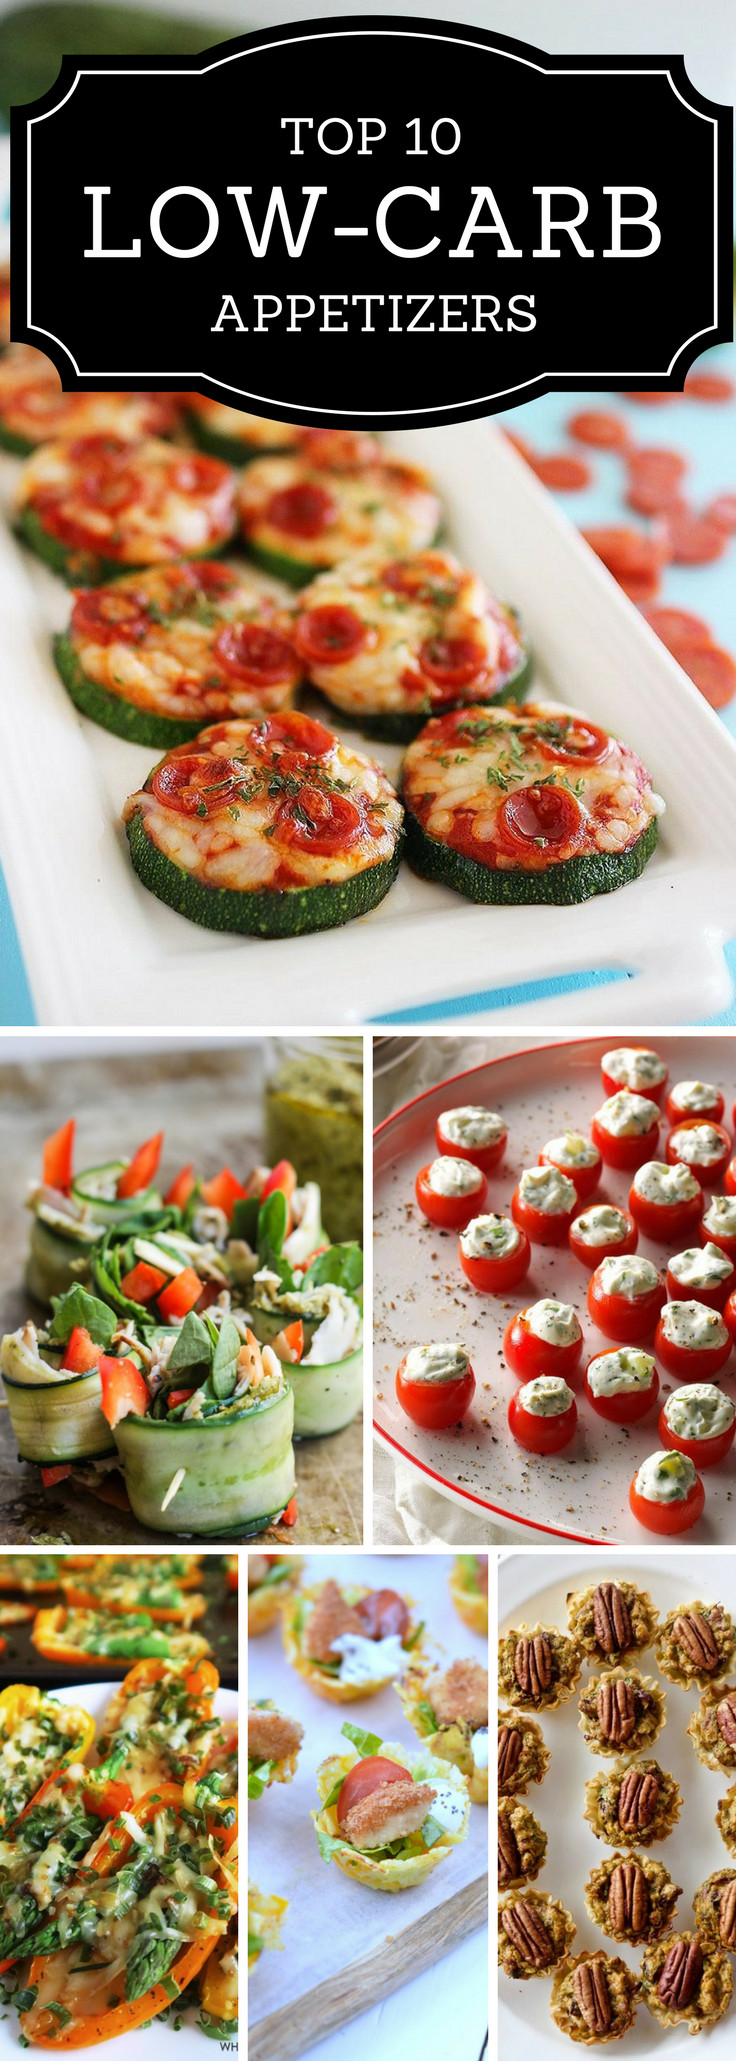 Low Carb Appetizers
 Top 10 Delicious Low Carb Appetizers